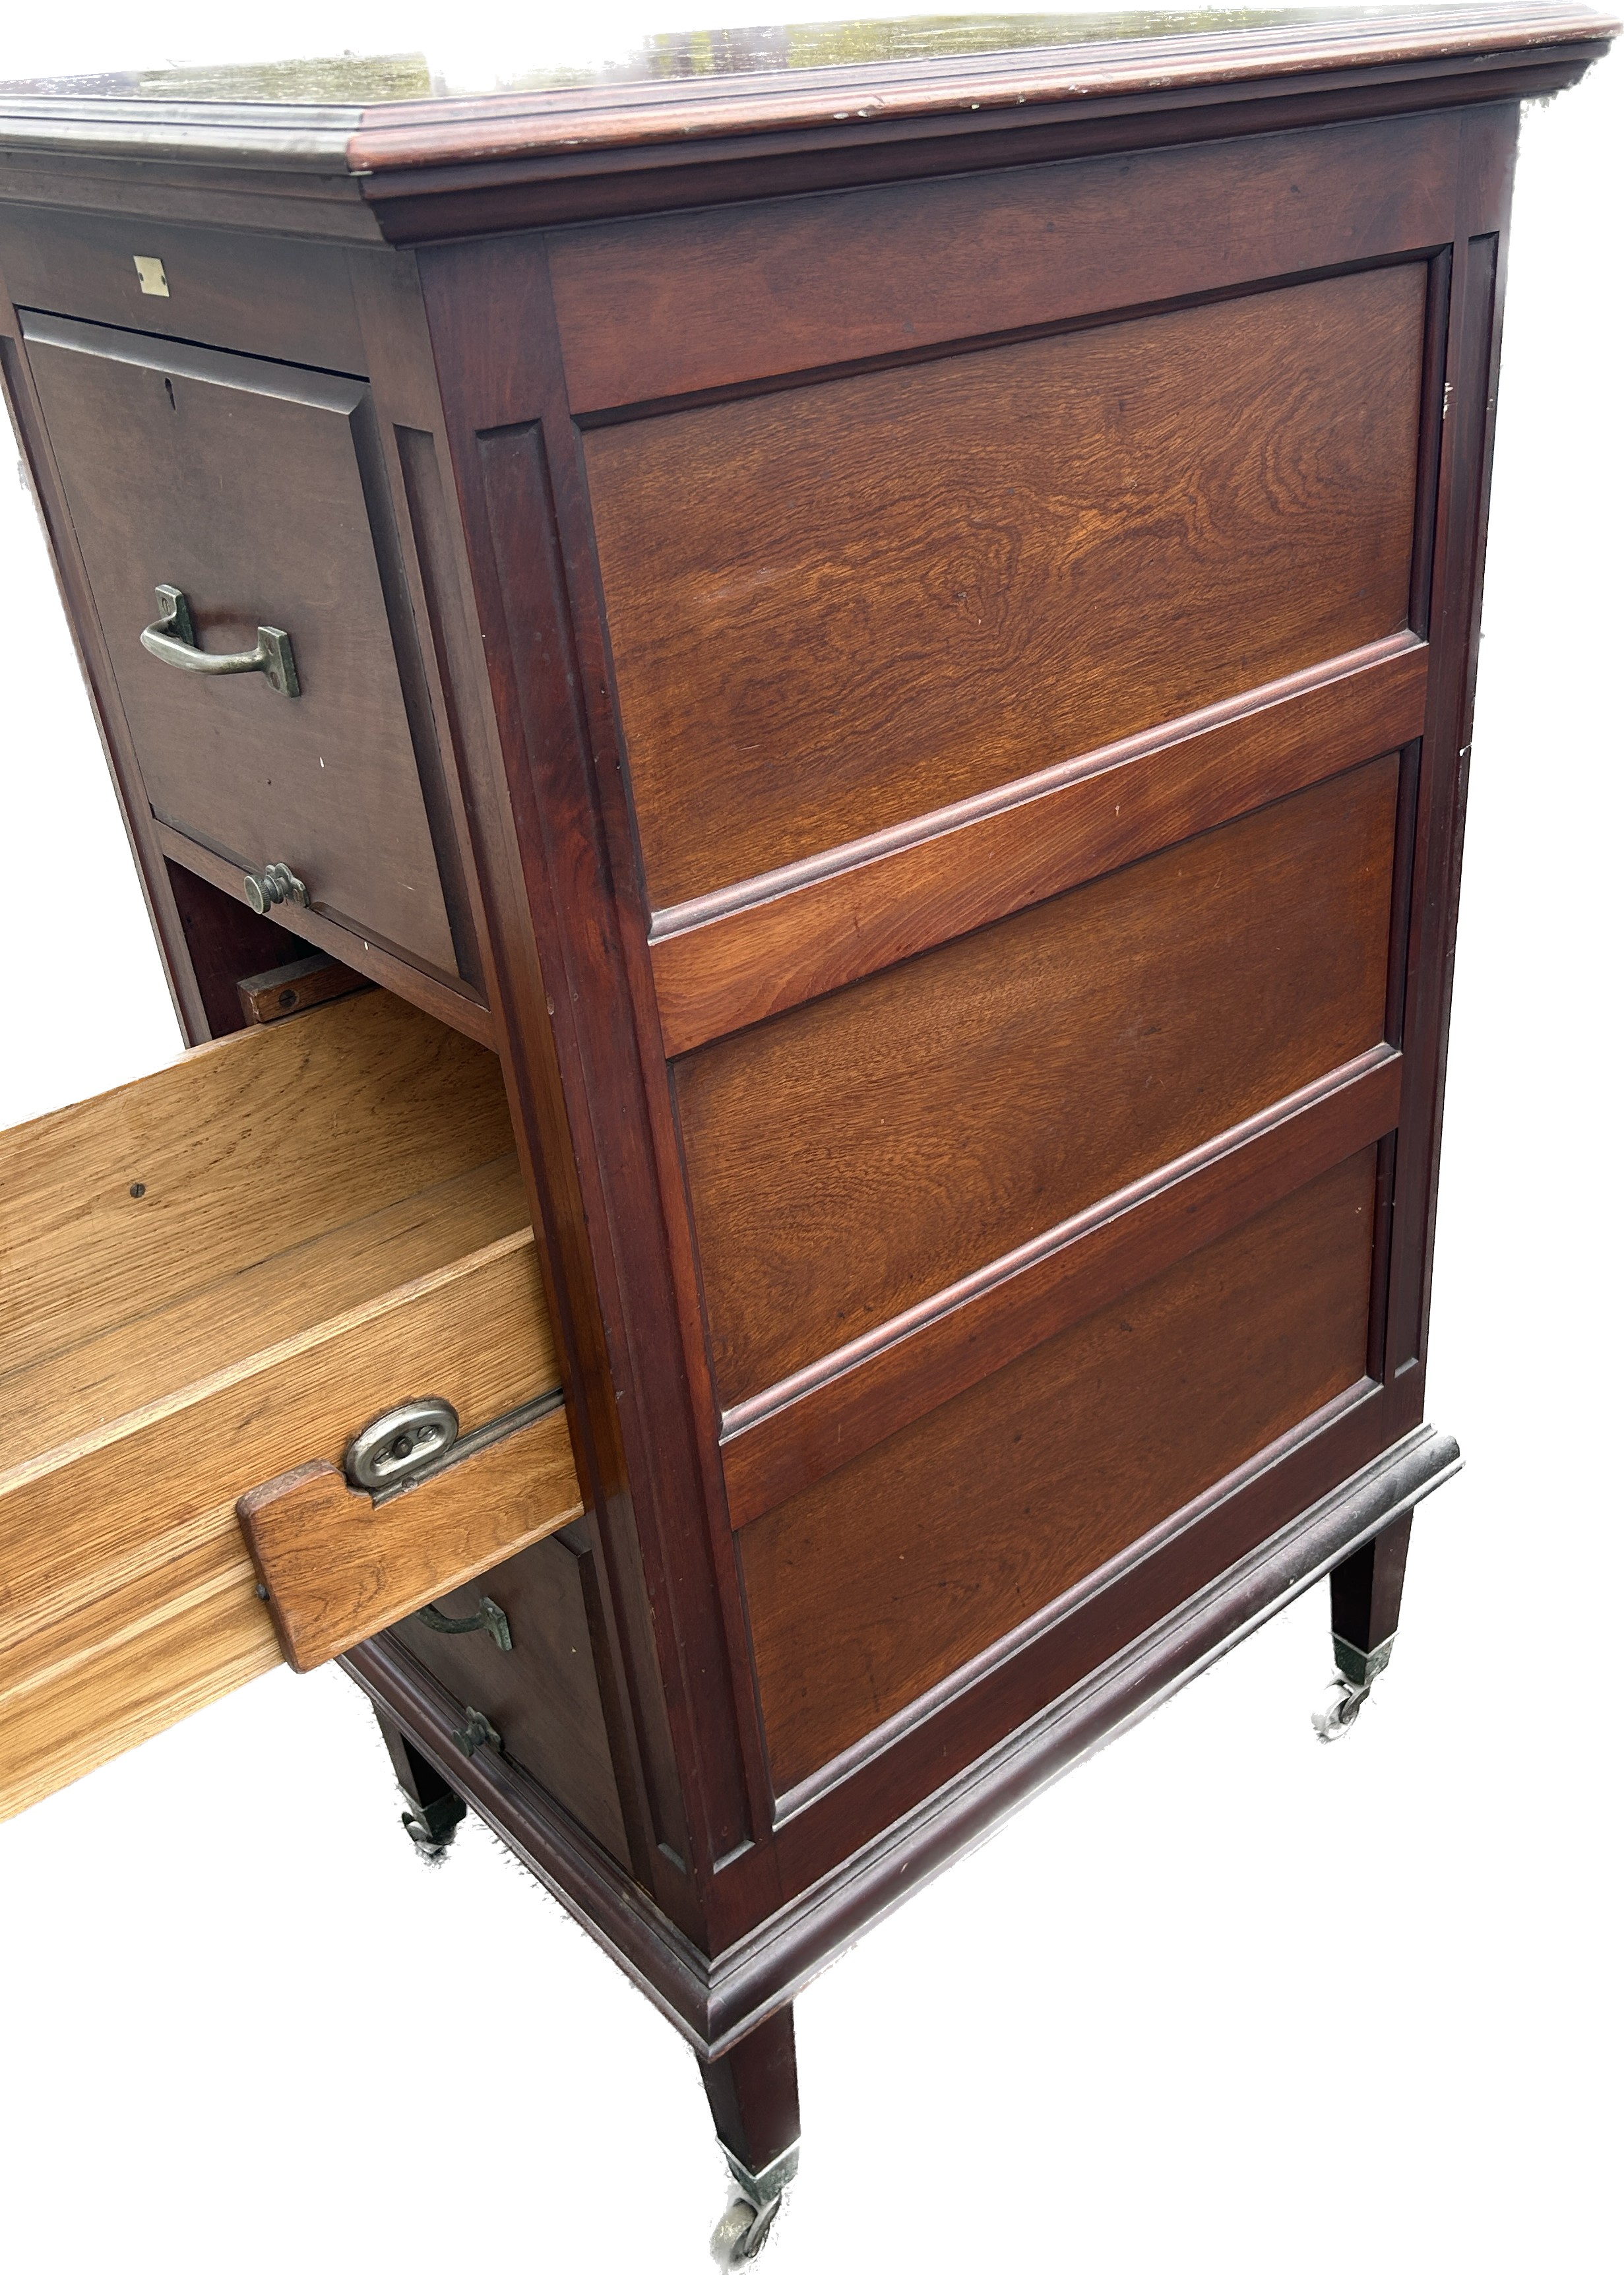 Mahogany Edwardian three drawer filing cabinet with panelled sides and back and brass casters - Image 2 of 4